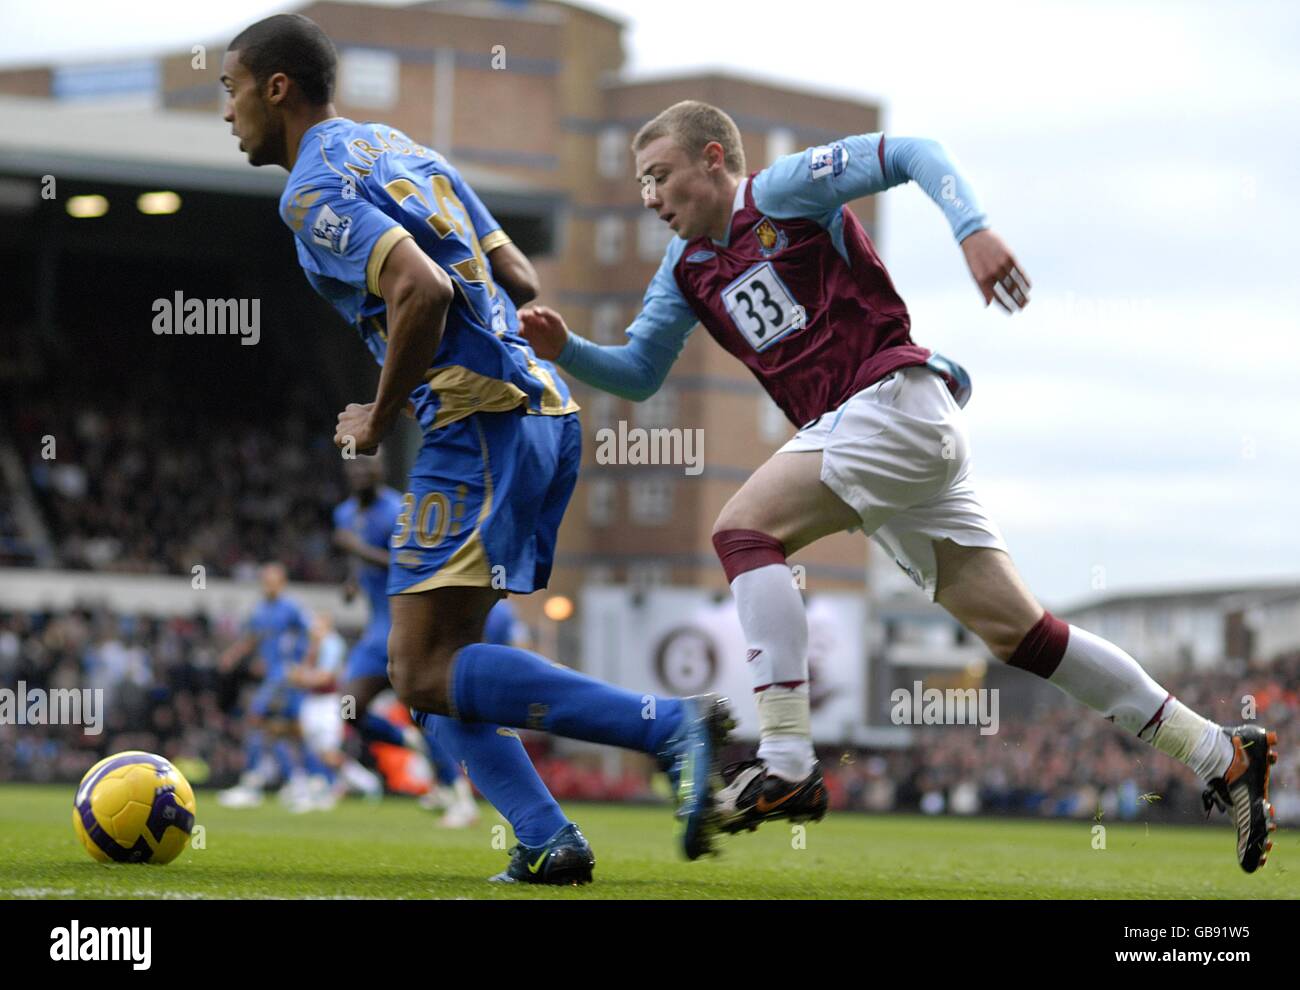 Soccer - Barclays Premier League - West Ham United v Portsmouth - Upton Park. Portsmouth's Armand Traore and West Ham United's Fred Sears (right) battle for the ball Stock Photo